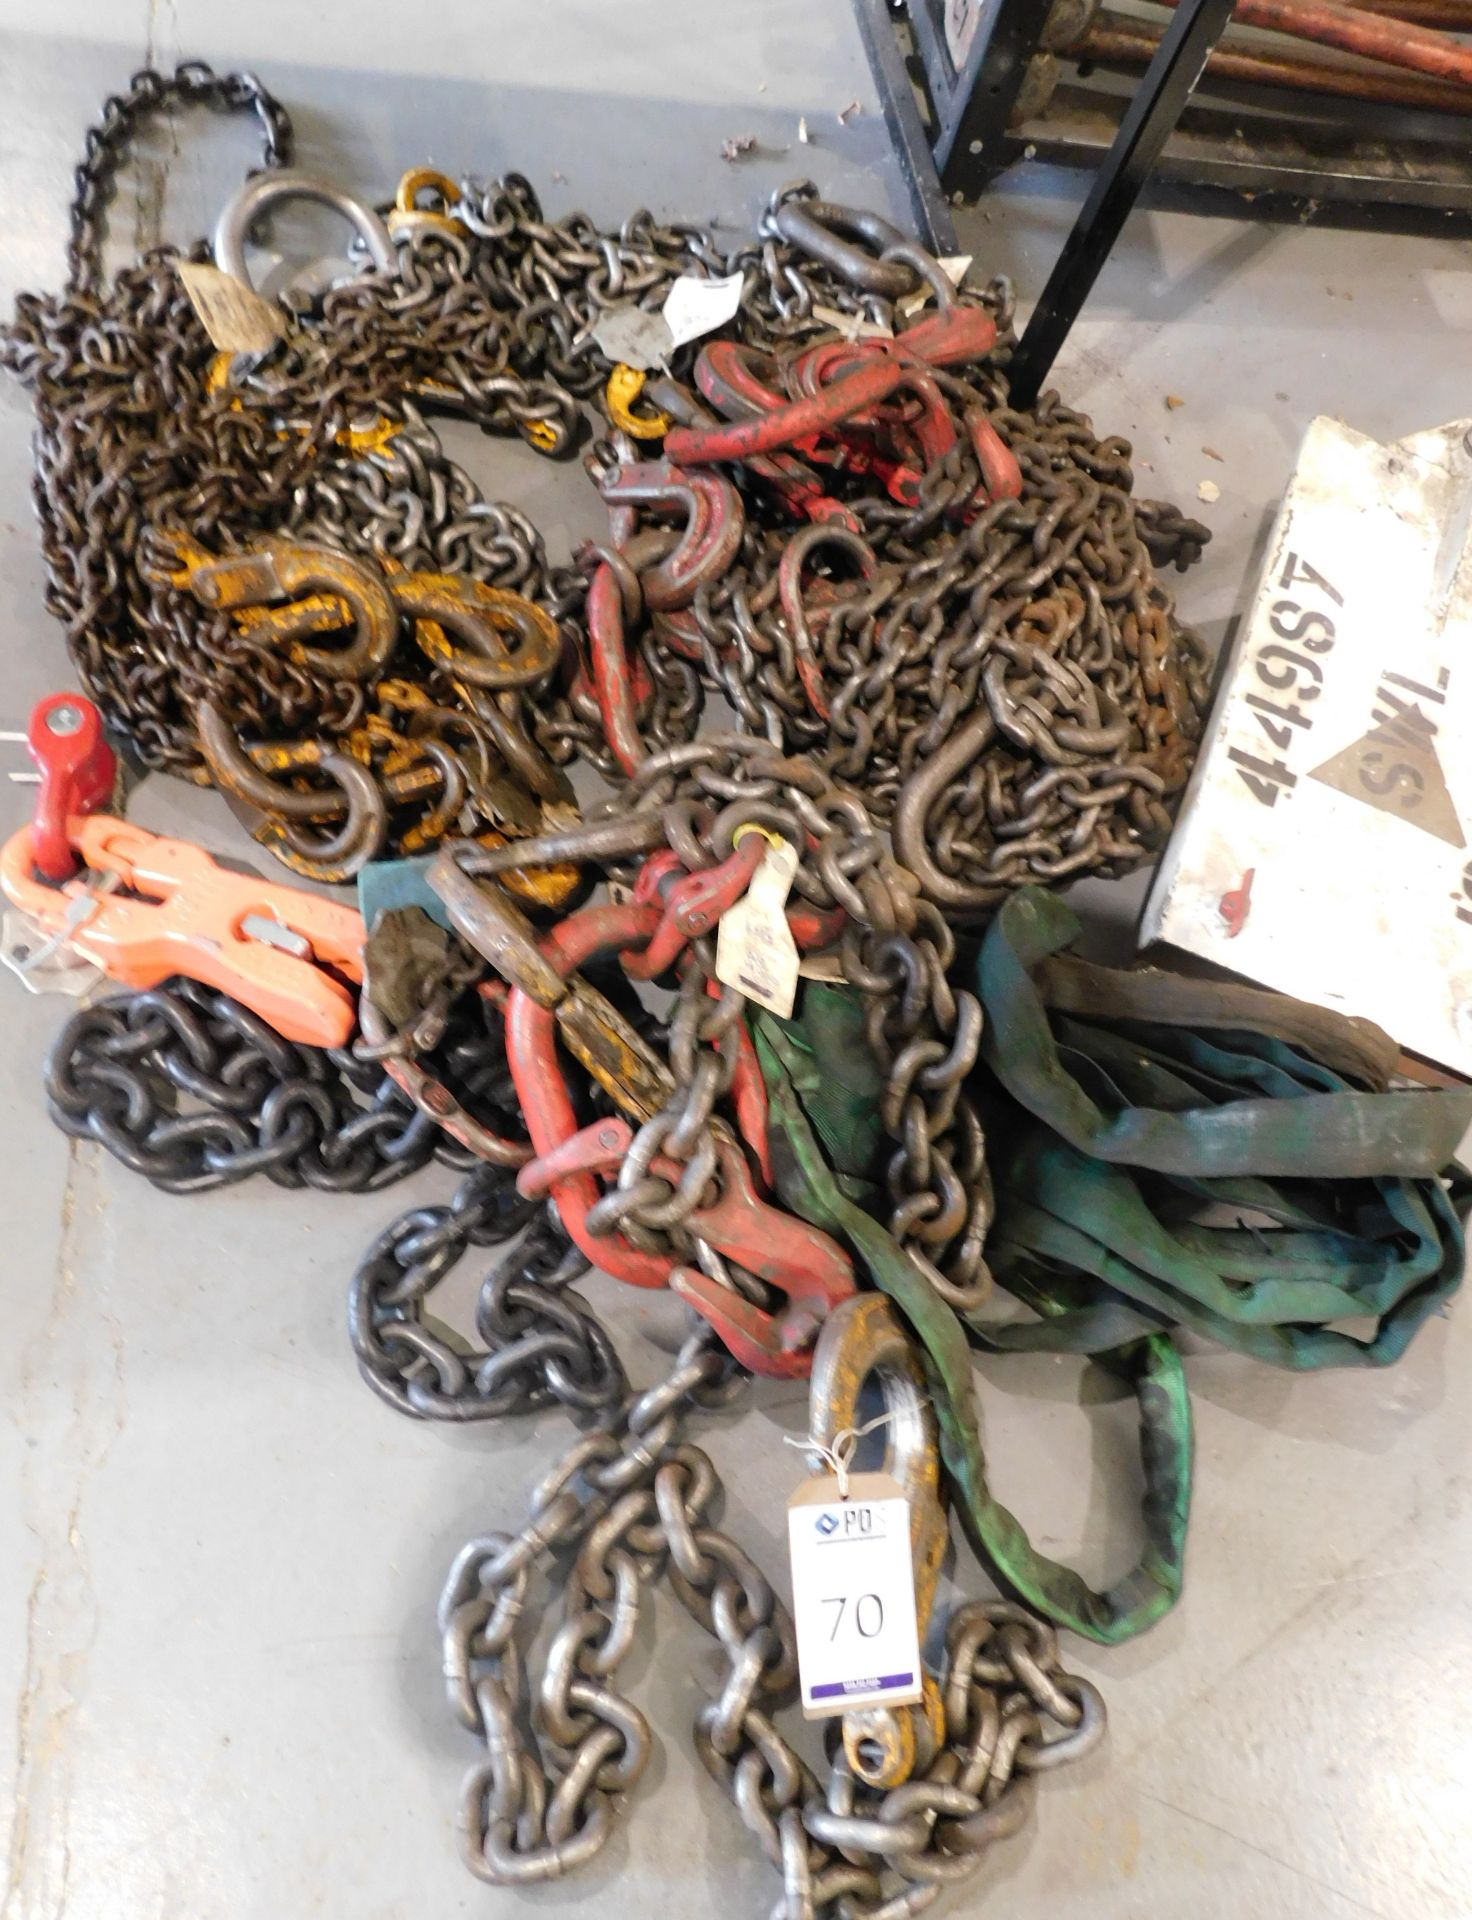 Quantity of 2 & 4 Leg Lifting Chains, Plate Clamp, Webbing Slings & Large D Shackles (Located Rugby.